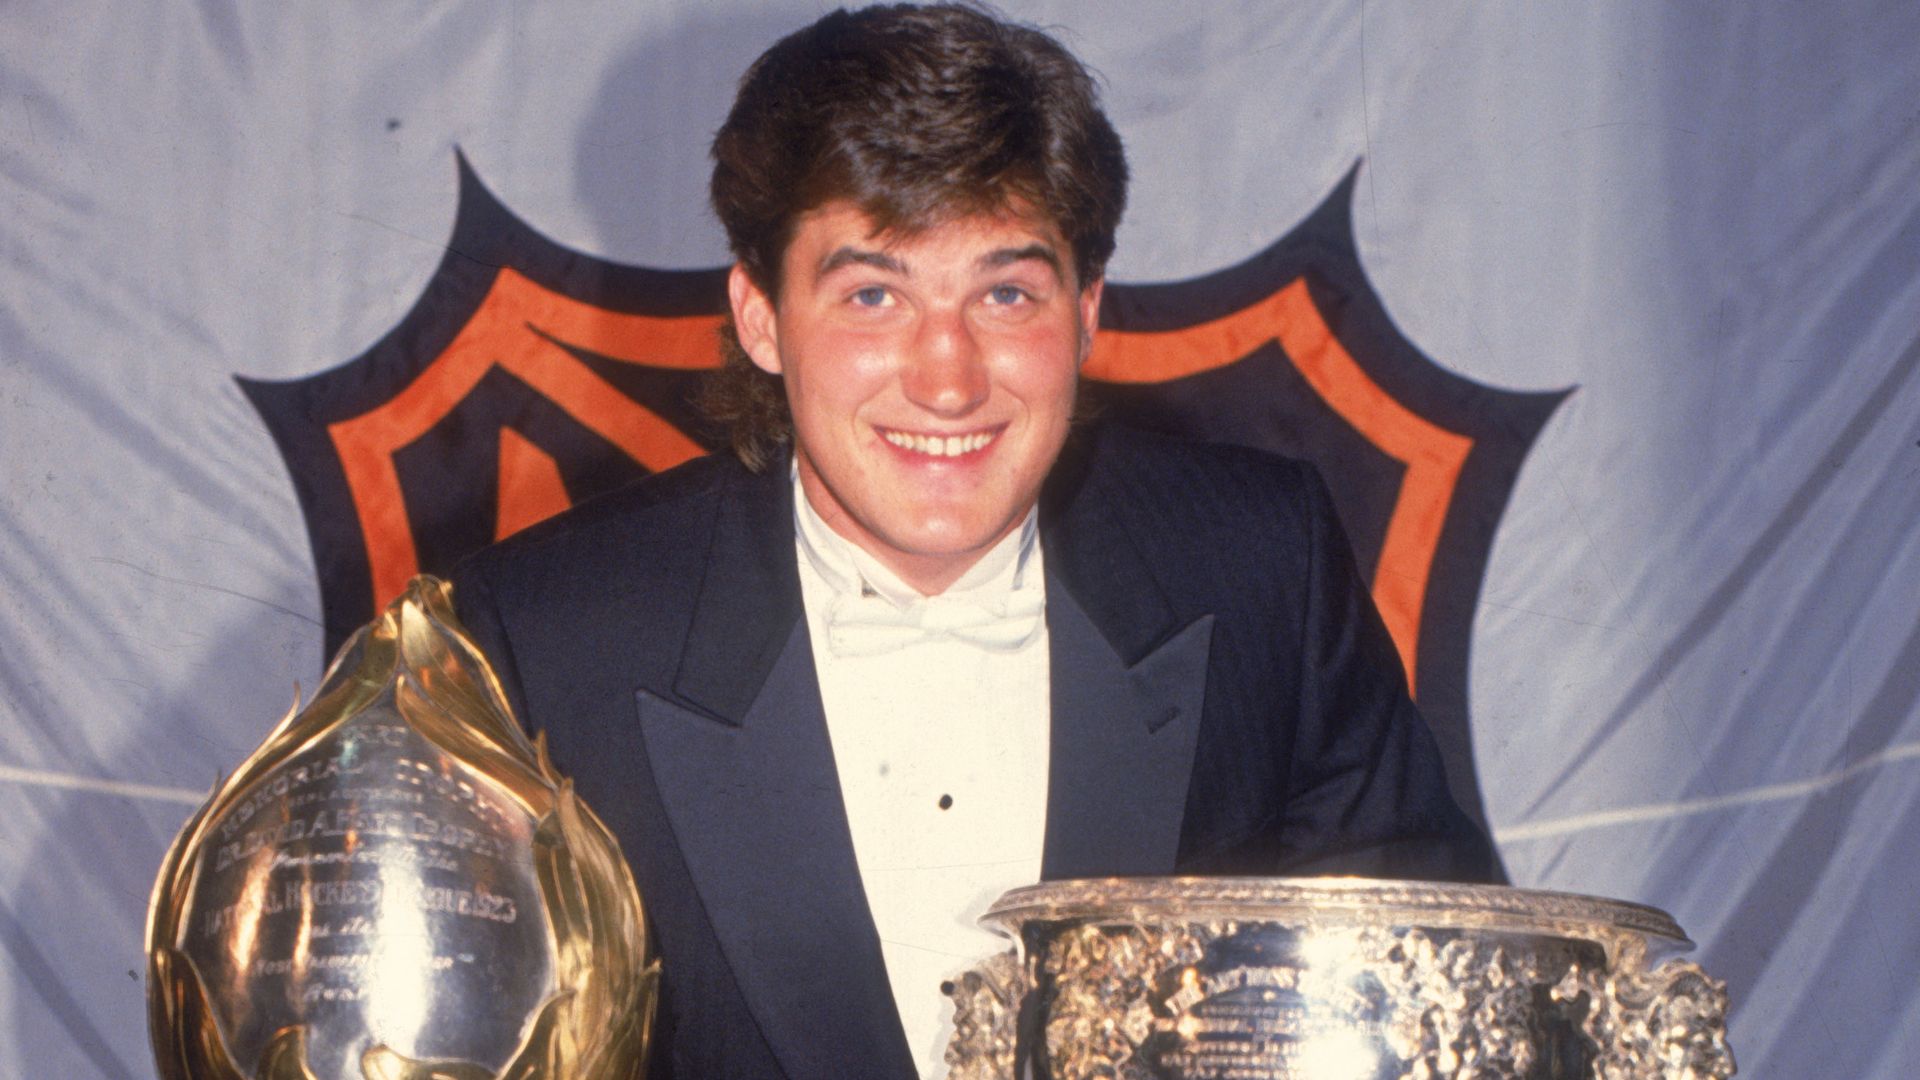 Mario Lemieux with the Hart Trophy and Art Ross Trophy